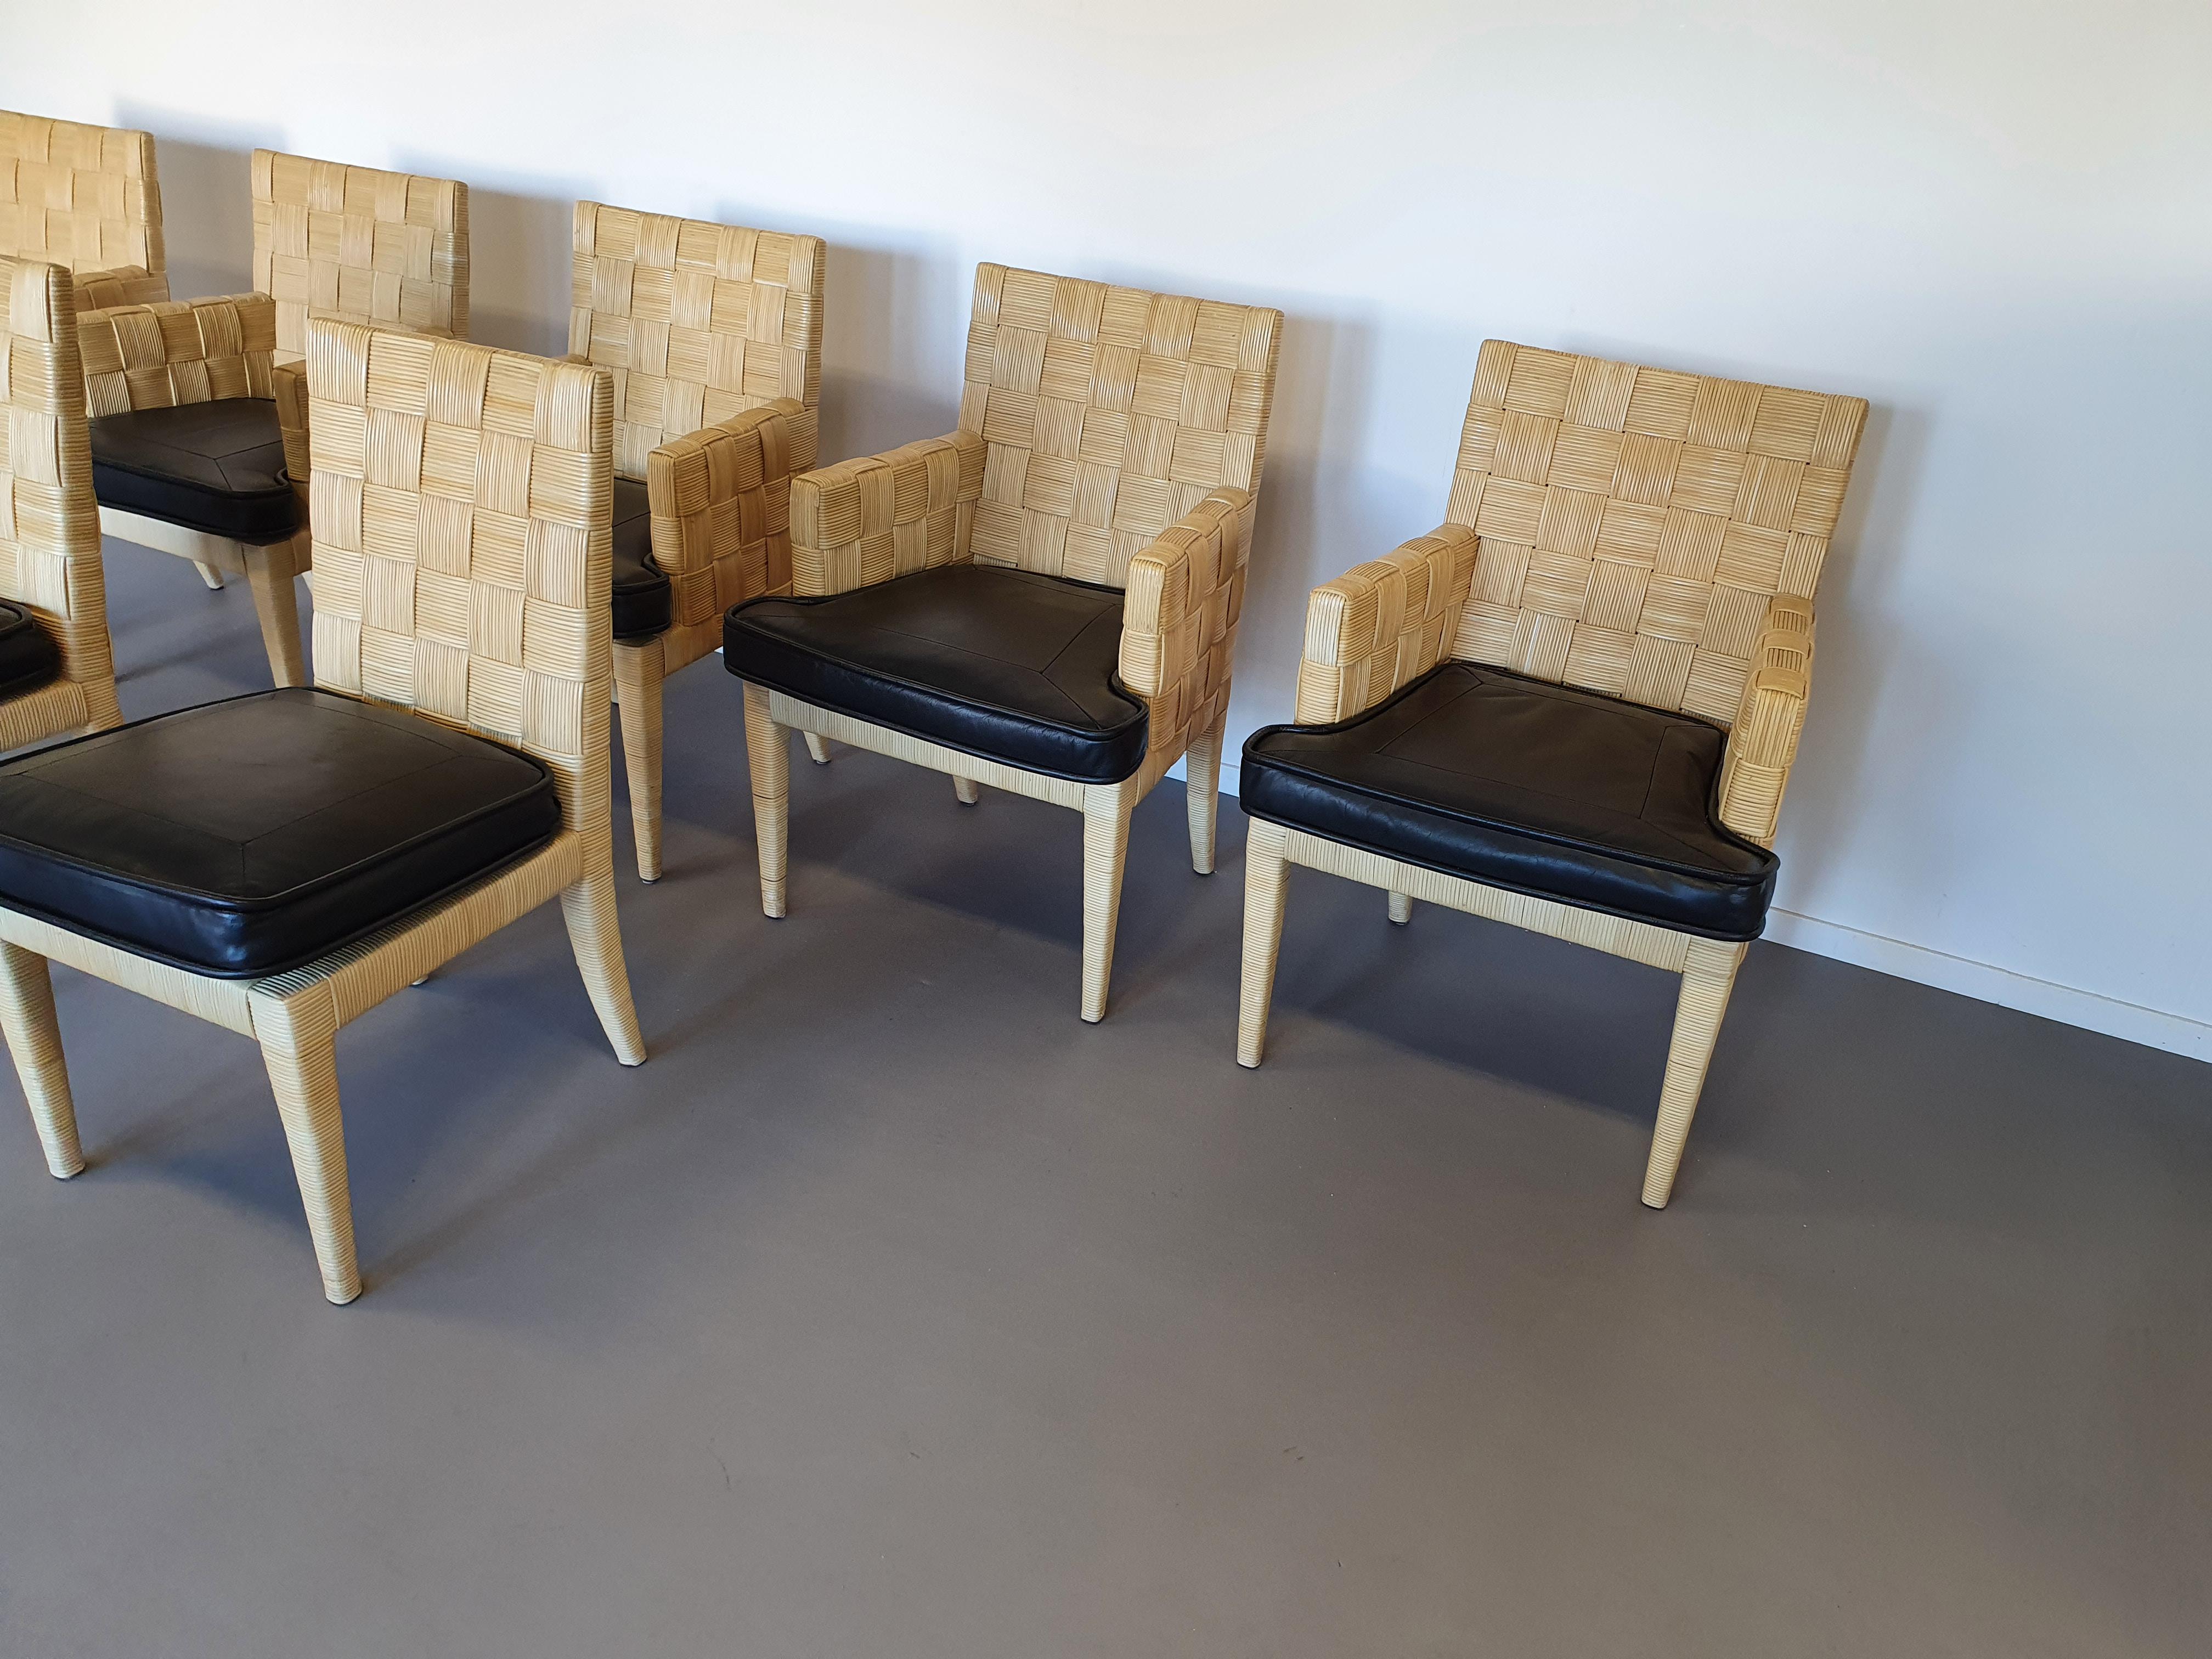 Donghia Block Island chairs 1990s with leather seats. 5 x armrests, 2 x without For Sale 2